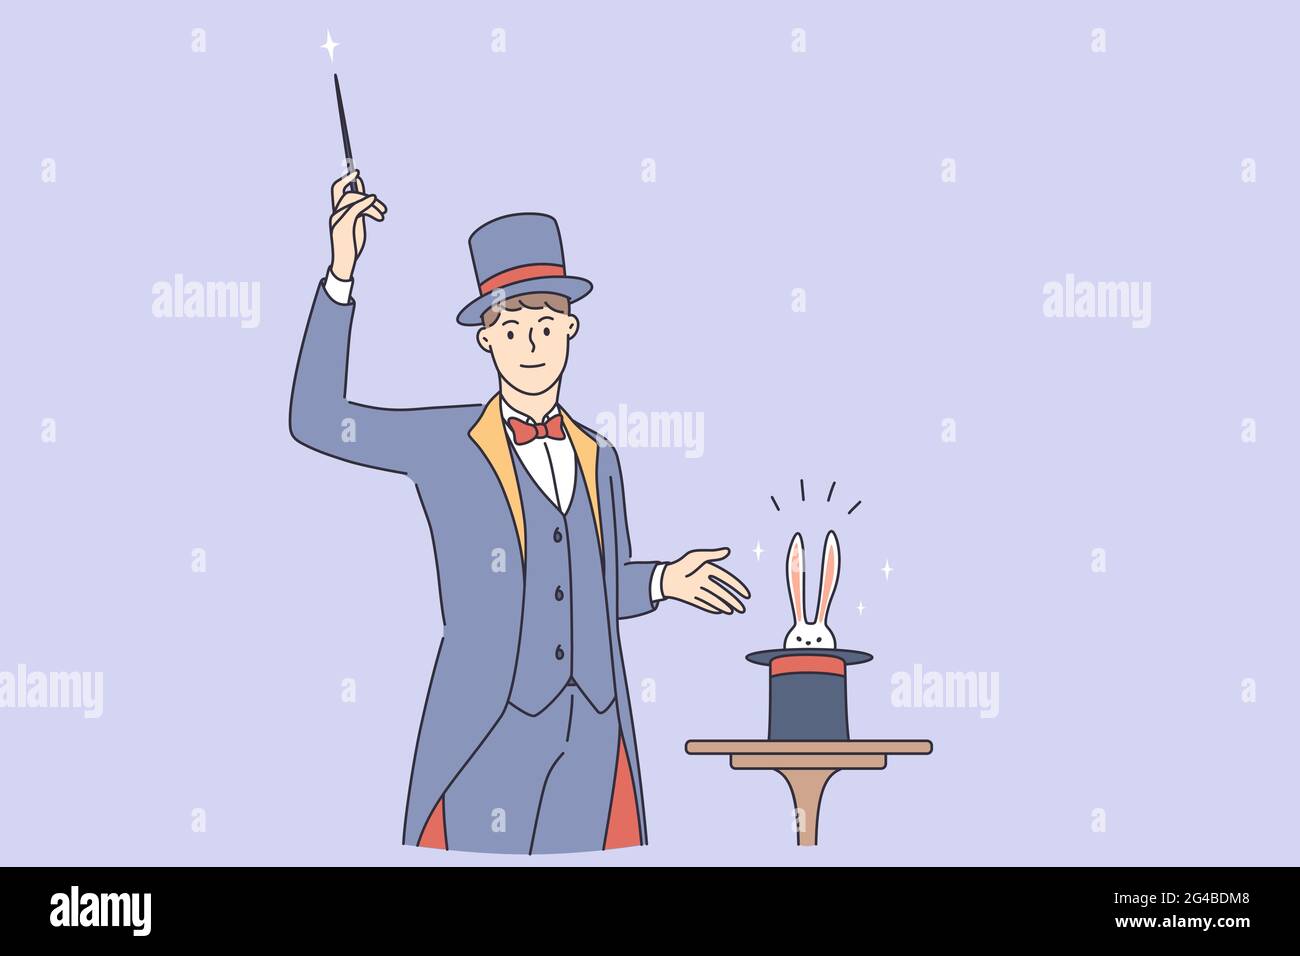 Magician making trick during work concept. Young smiling man magician wearing traditional costume standing with stick making magic trick with rabbit in hat vector illustration Stock Vector